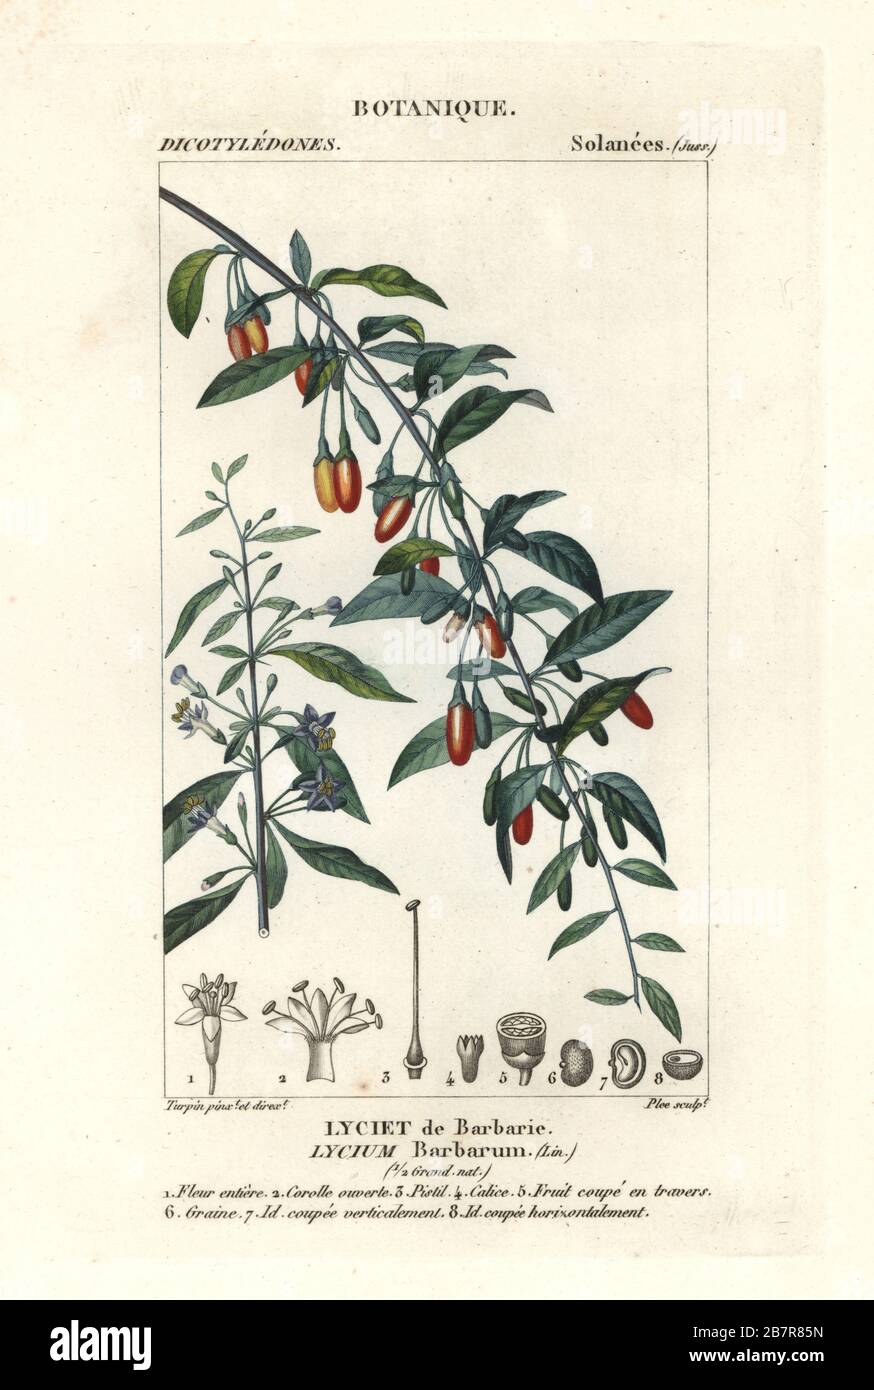 Goji berry, Lycium barbarum. Handcoloured copperplate stipple engraving from Antoine Laurent de Jussieu's Dizionario delle Scienze Naturali, Dictionary of Natural Science, Florence, Italy, 1837. Illustration engraved by Plee, drawn and directed by Pierre Jean-Francois Turpin, and published by Batelli e Figli. Turpin (1775-1840) is considered one of the greatest French botanical illustrators of the 19th century. Stock Photo